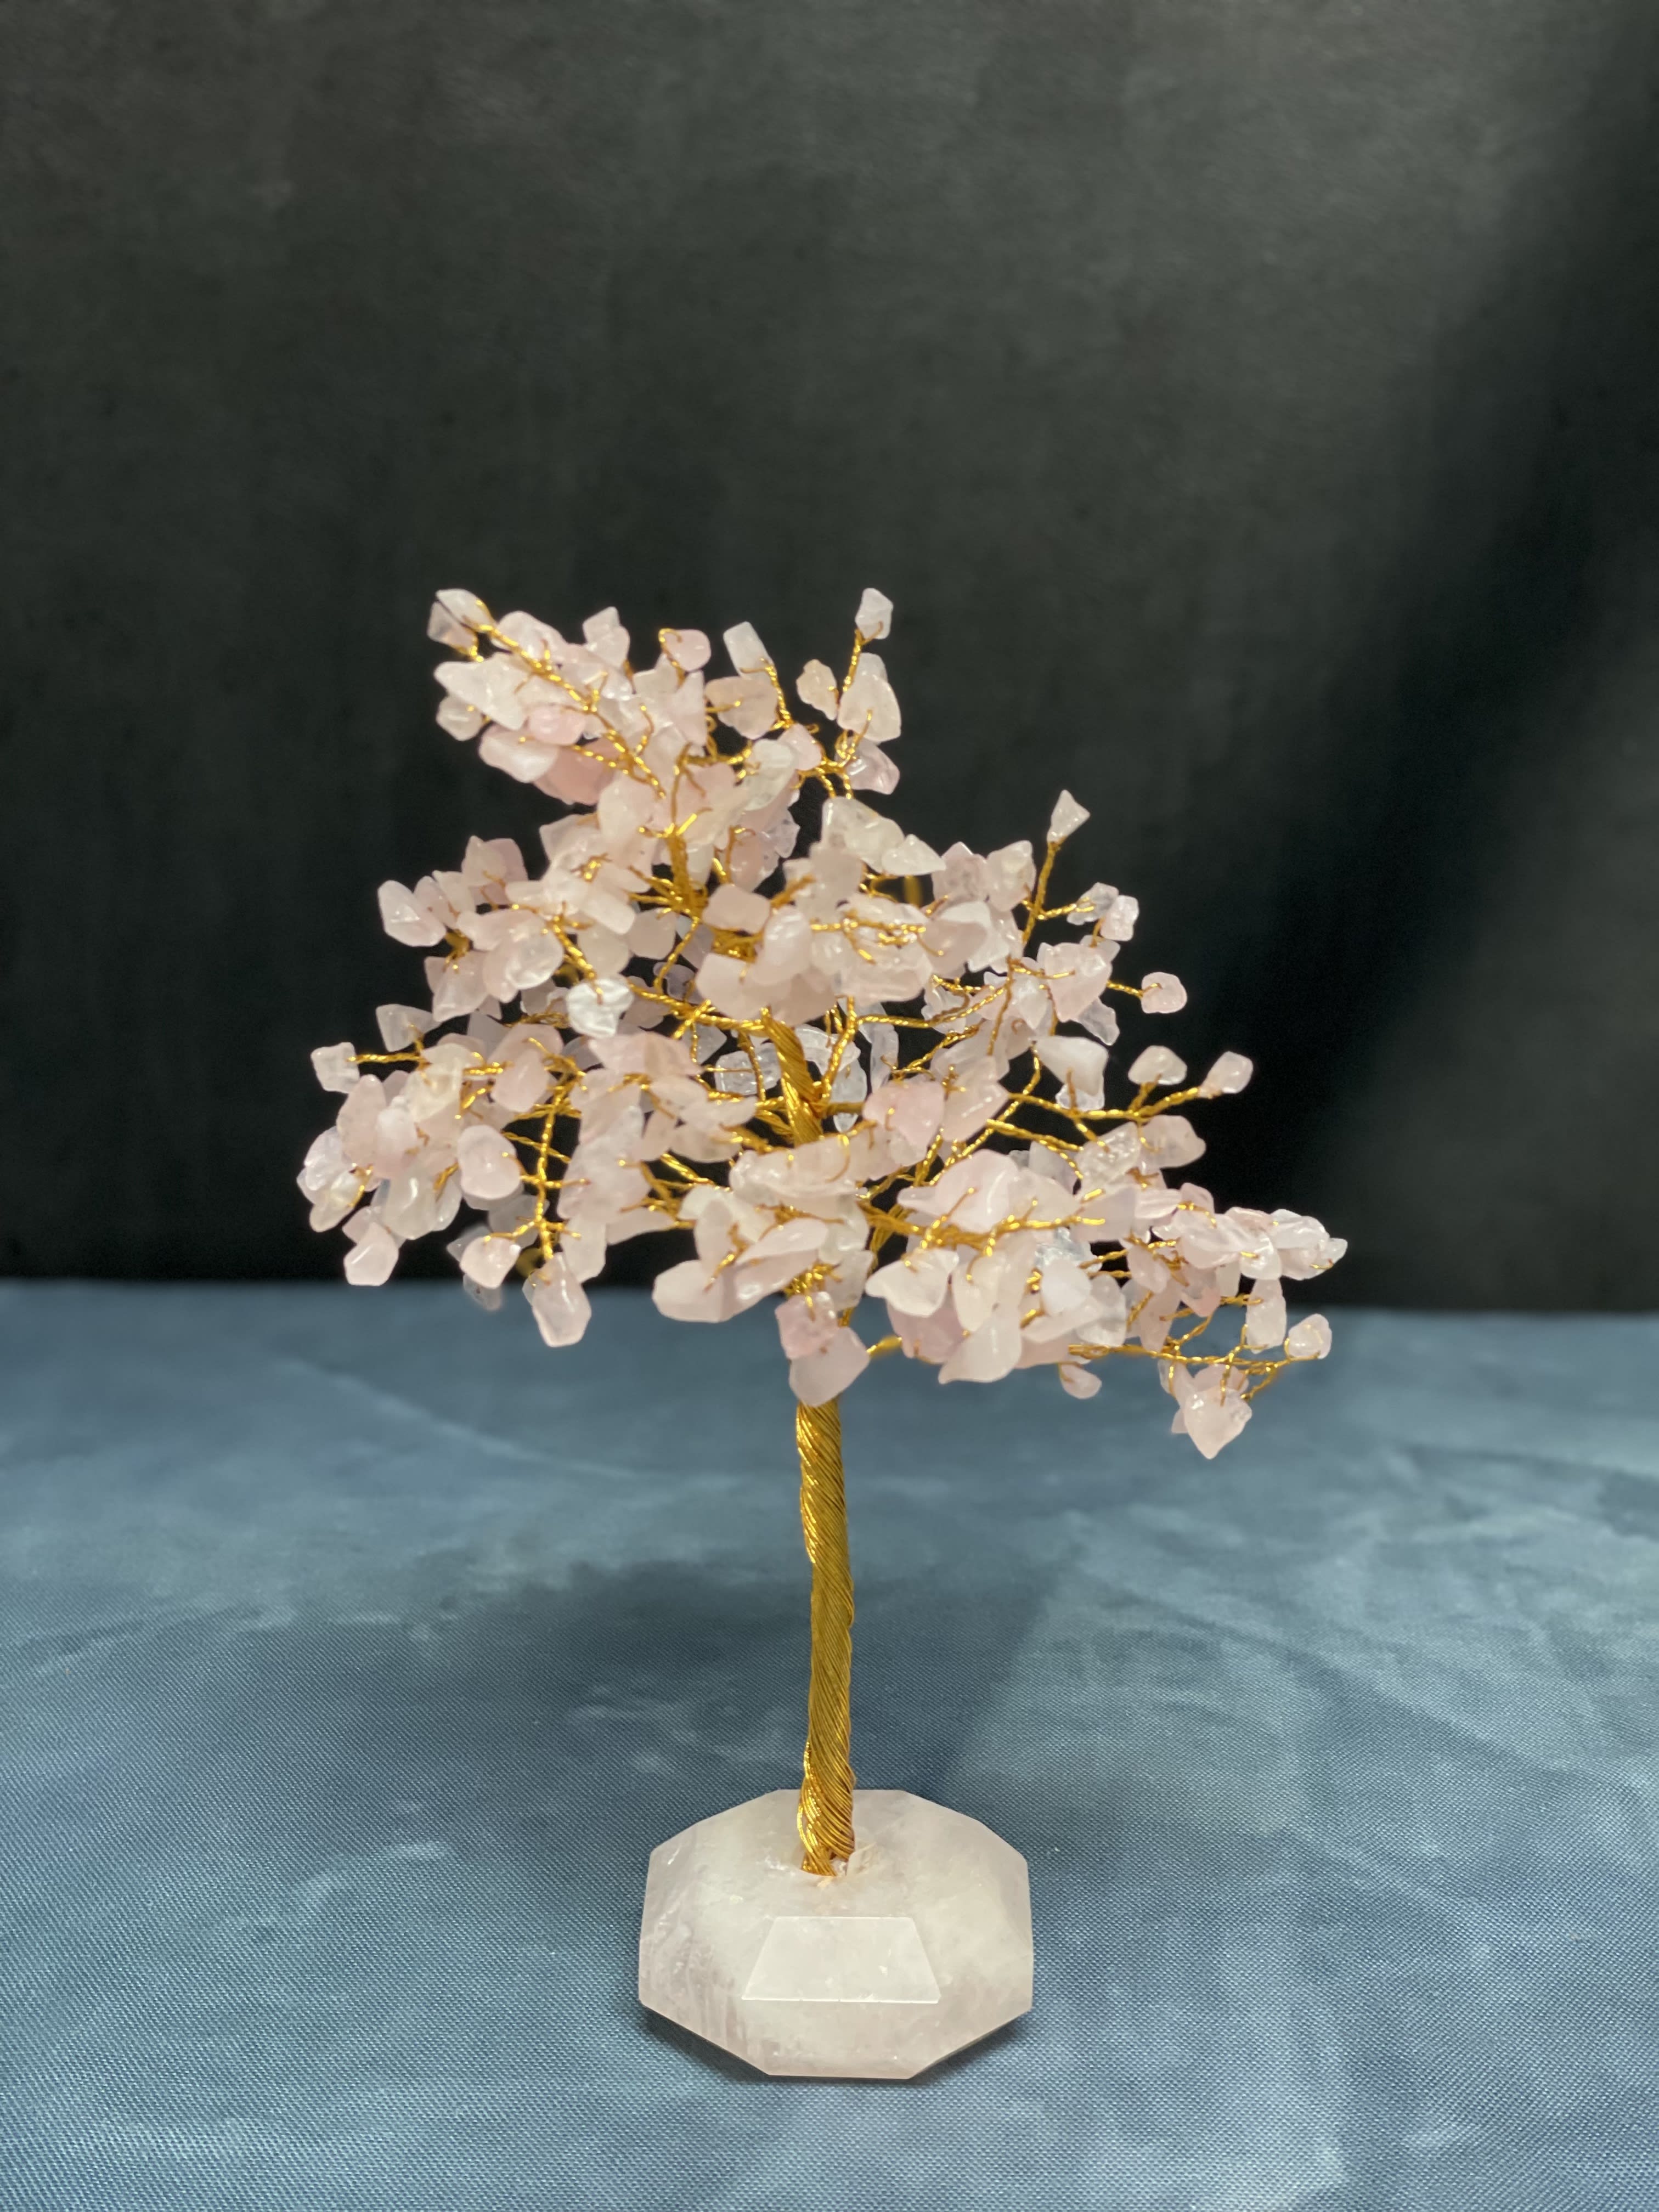 8&quot; Rose Quartz Gemstone Tree  - ROSE QUARTZ is the essential stone for increasing love and for times of extreme emotional turmoil, such as divorce, bereavement or career set backs because it helps to remind the wearer the importance of self-love. It stimulates the body’s love centers and can result in peace and fidelity in committed relationship. Base may vary.